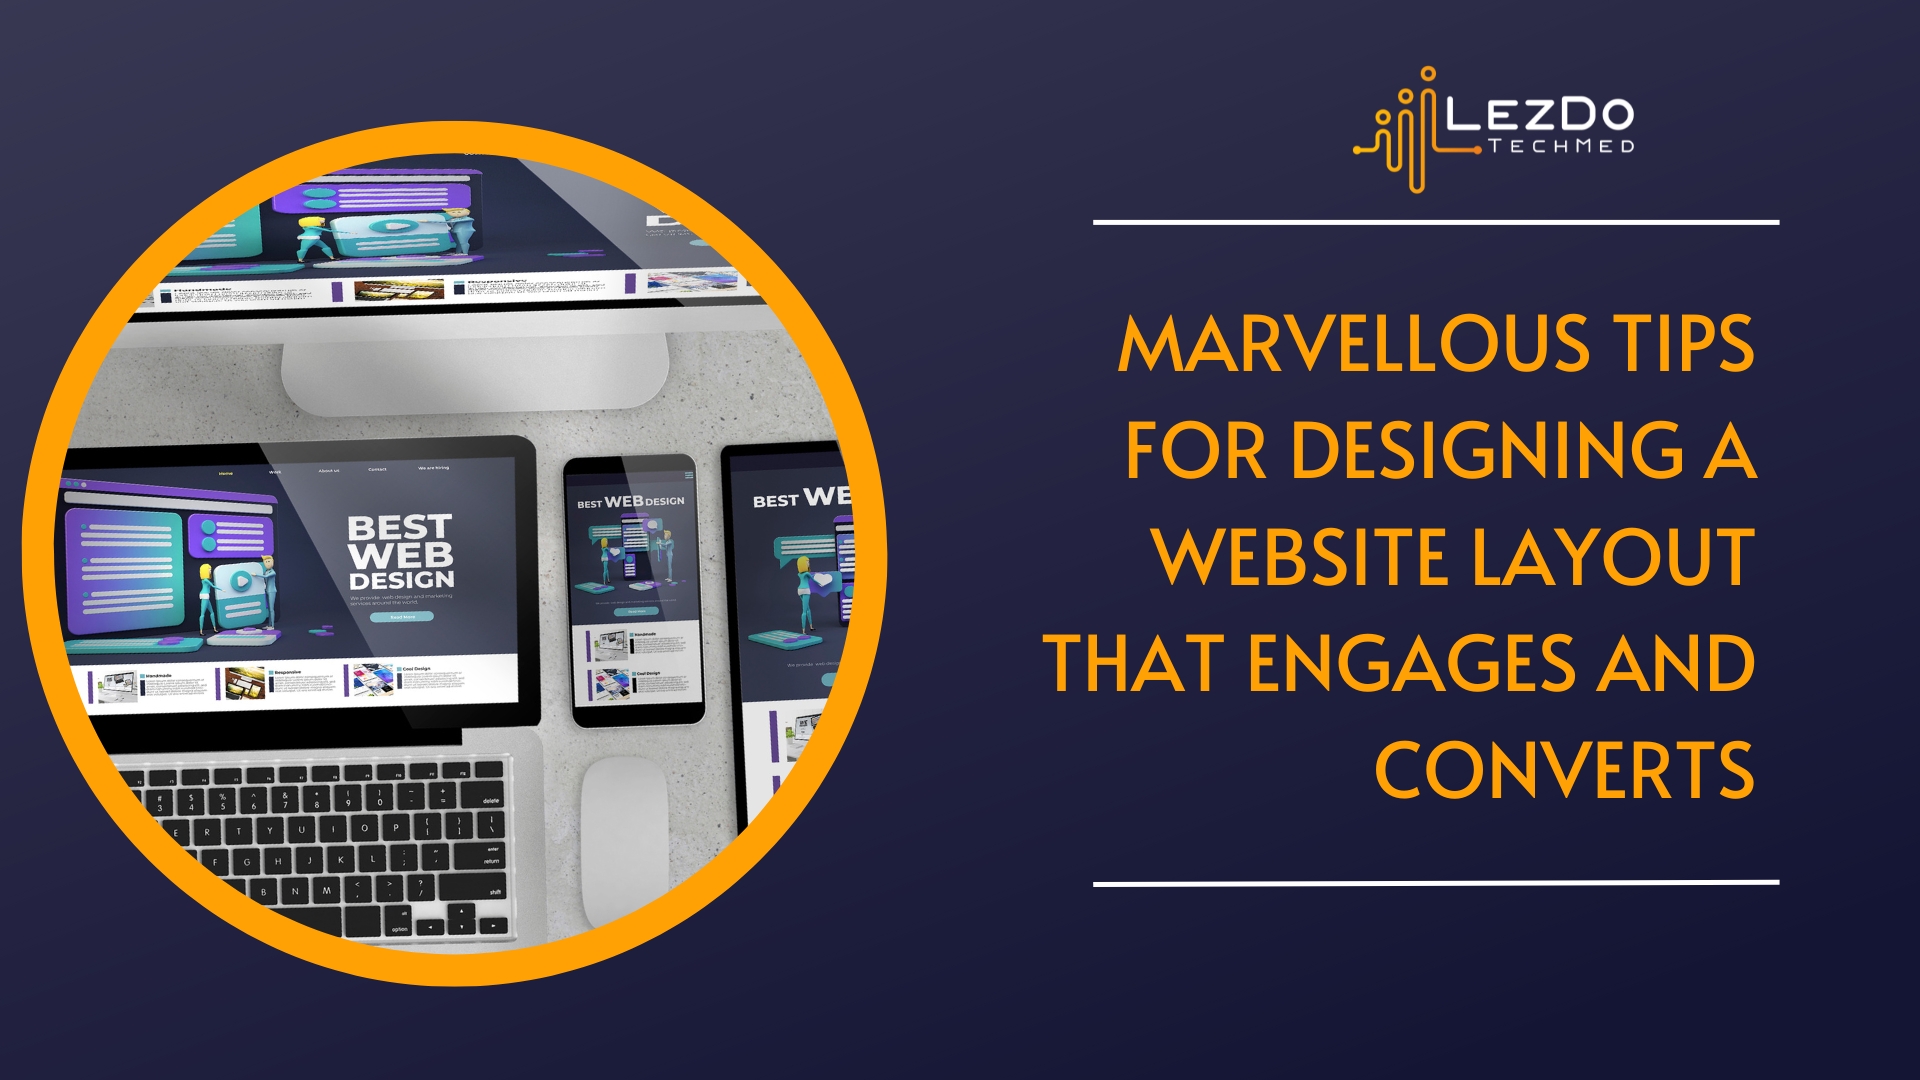 Marvellous-Tips-for-Designing-a-Website-Layout-that-Engages-and-Converts